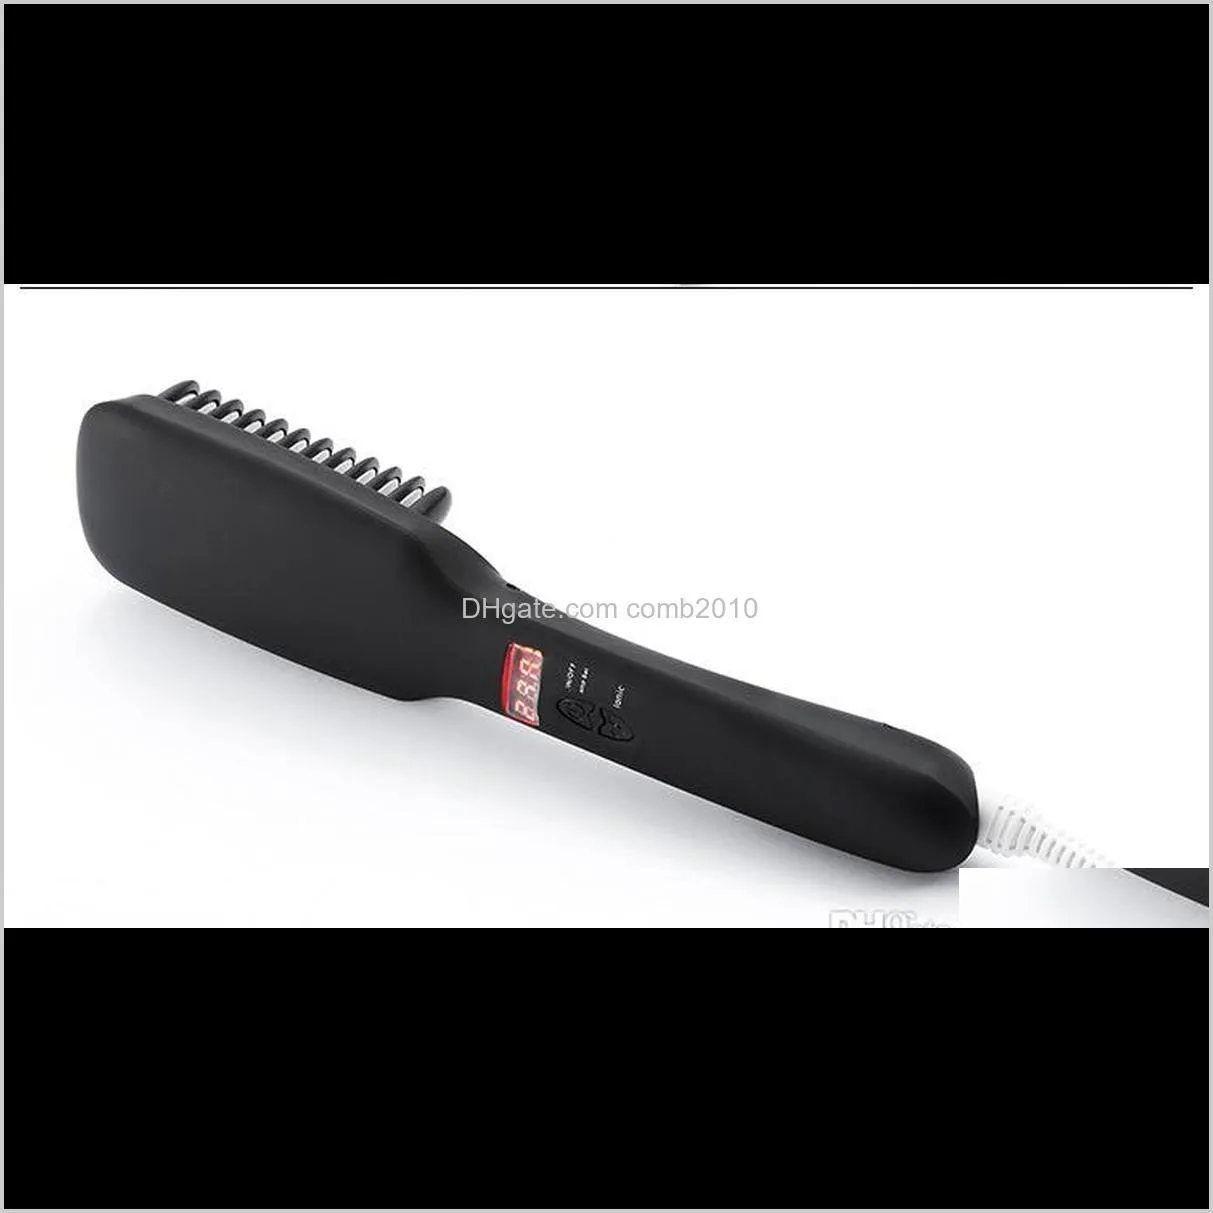 new 2 in 1 brush hair straightener comb irons with lcd display 100-240v electric straight hair comb straightening brush 40pcs